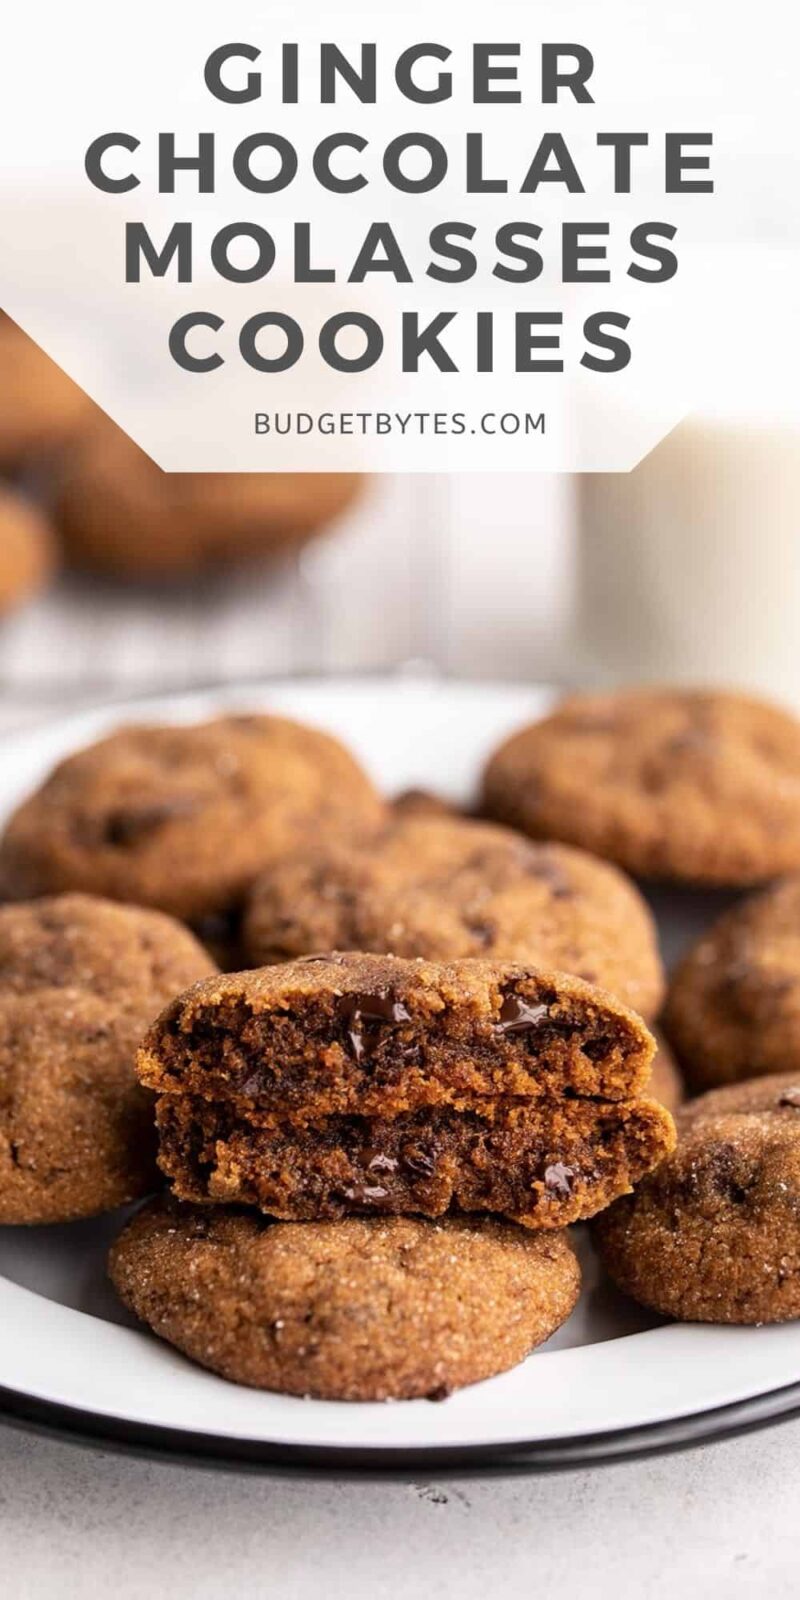 chocolate molasses cookies on a plate, title text at the top